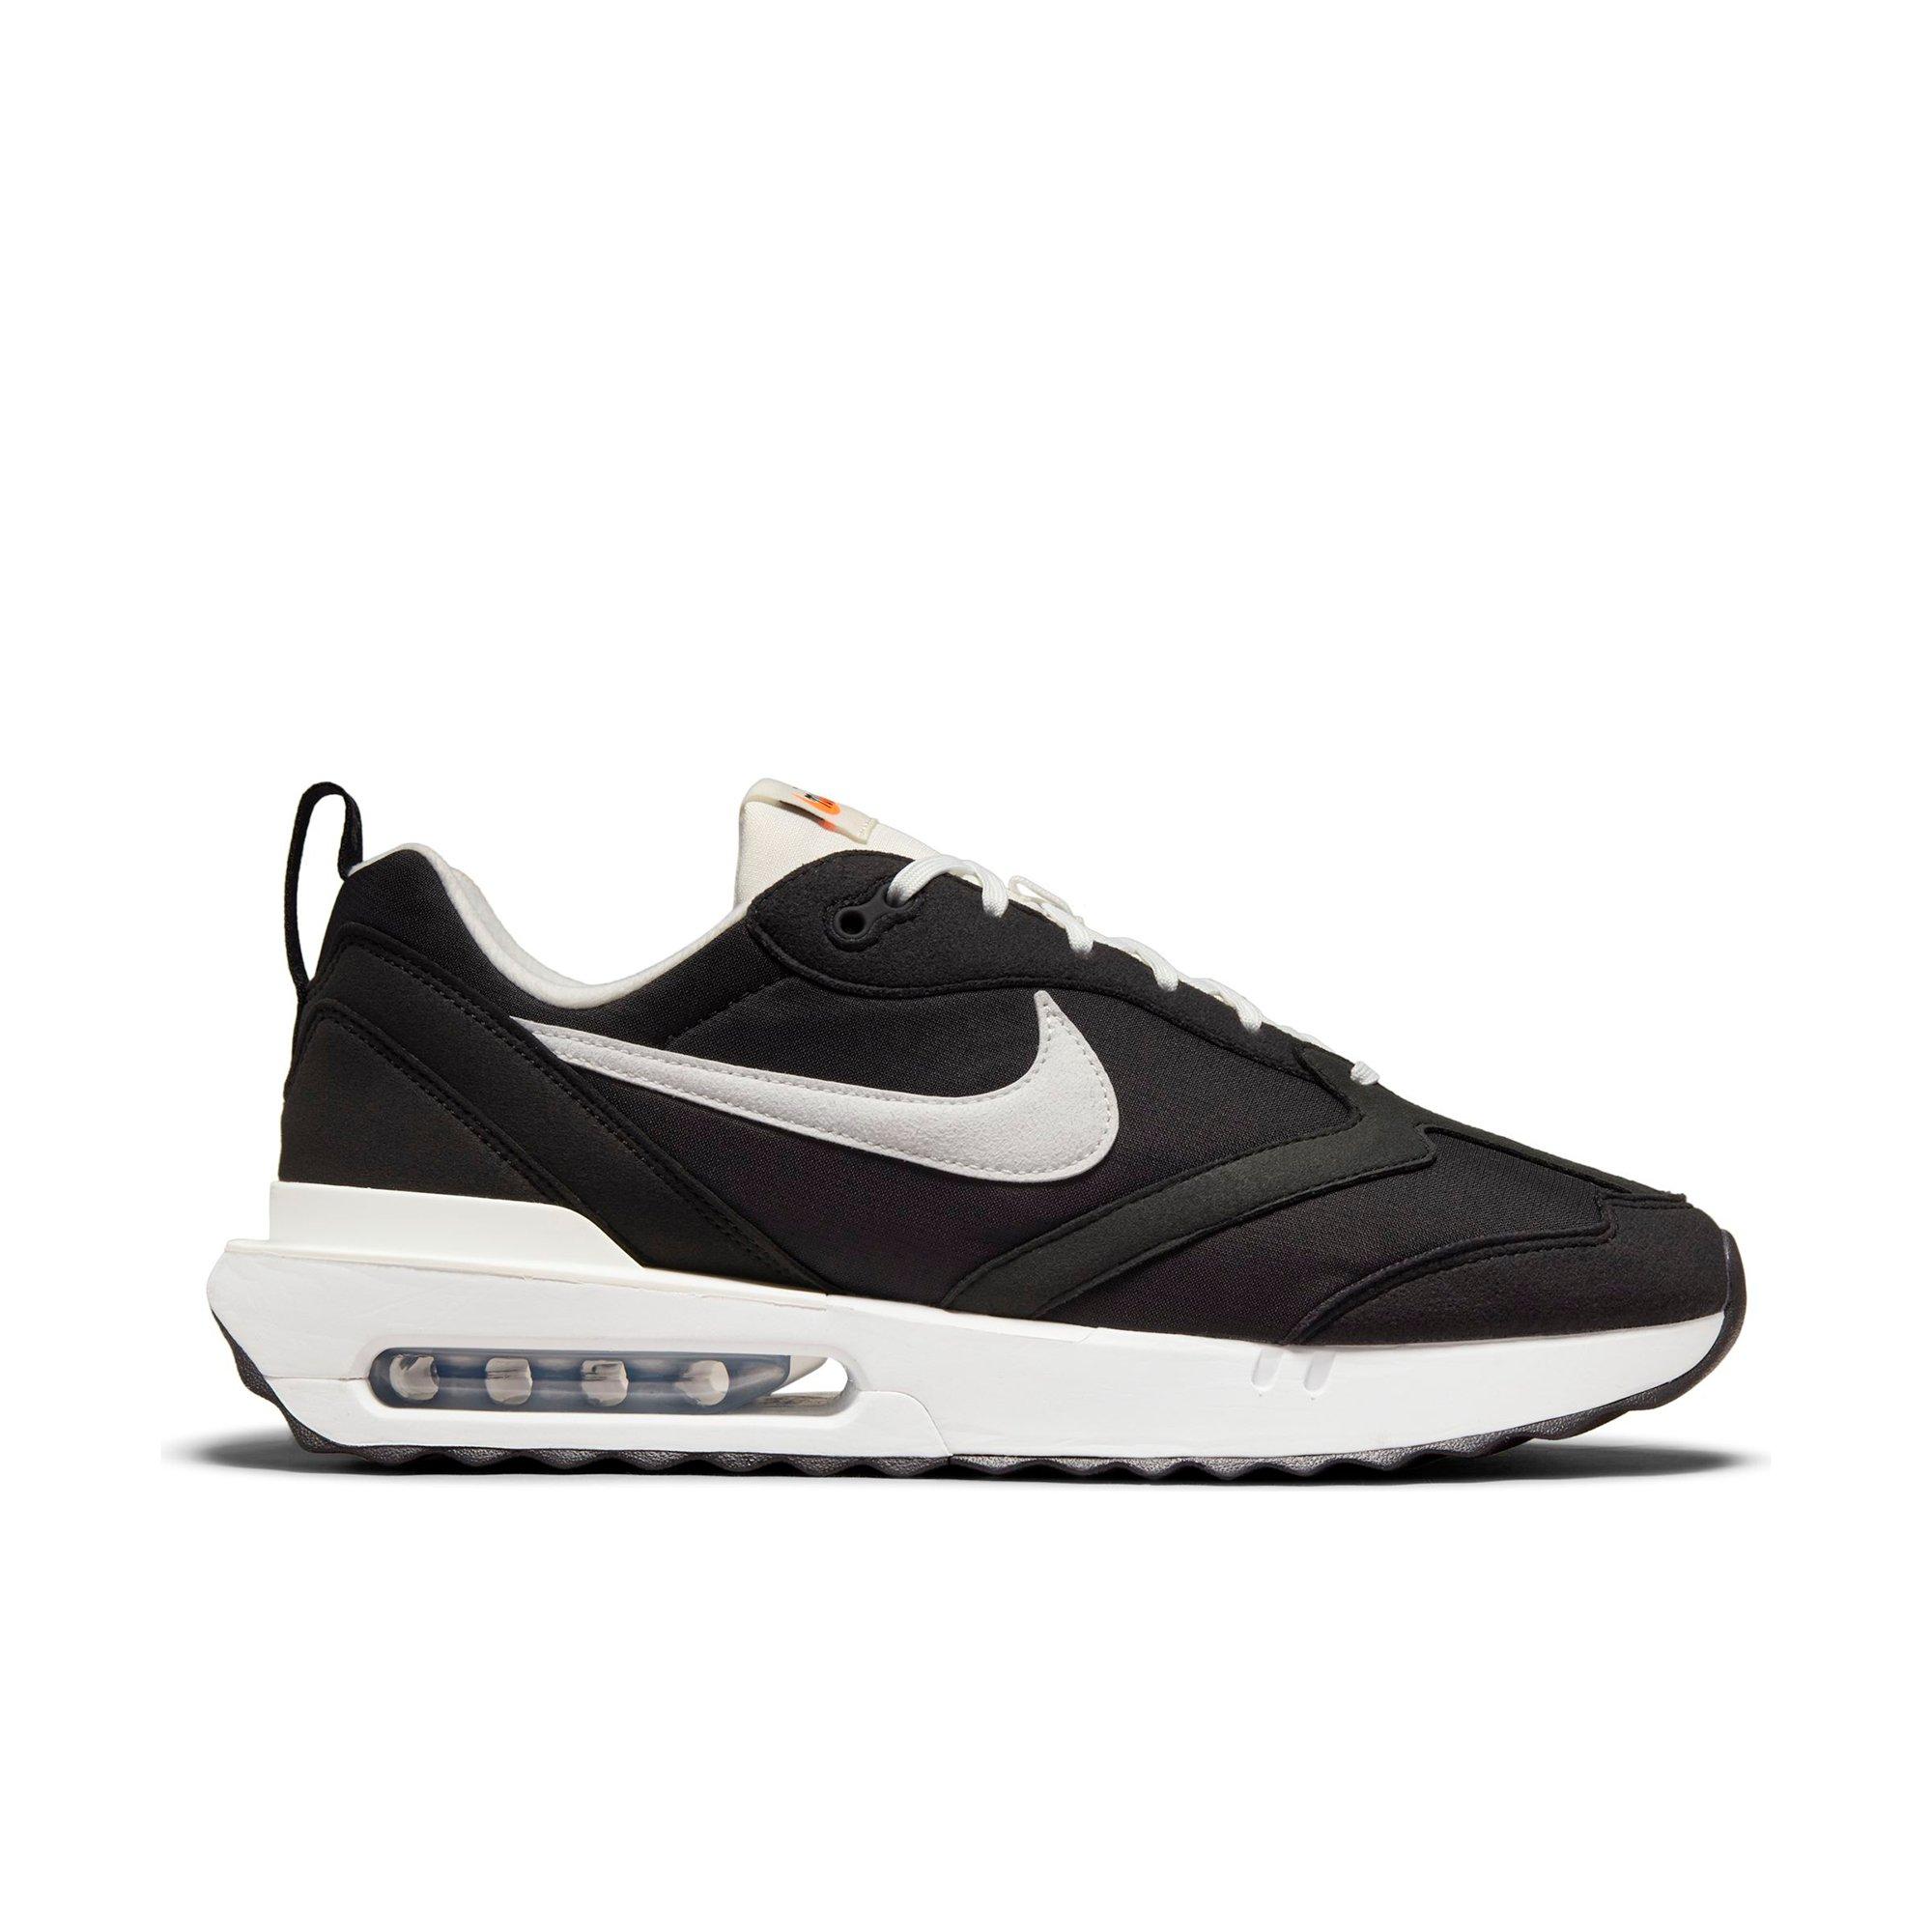 white and black nike air max shoes